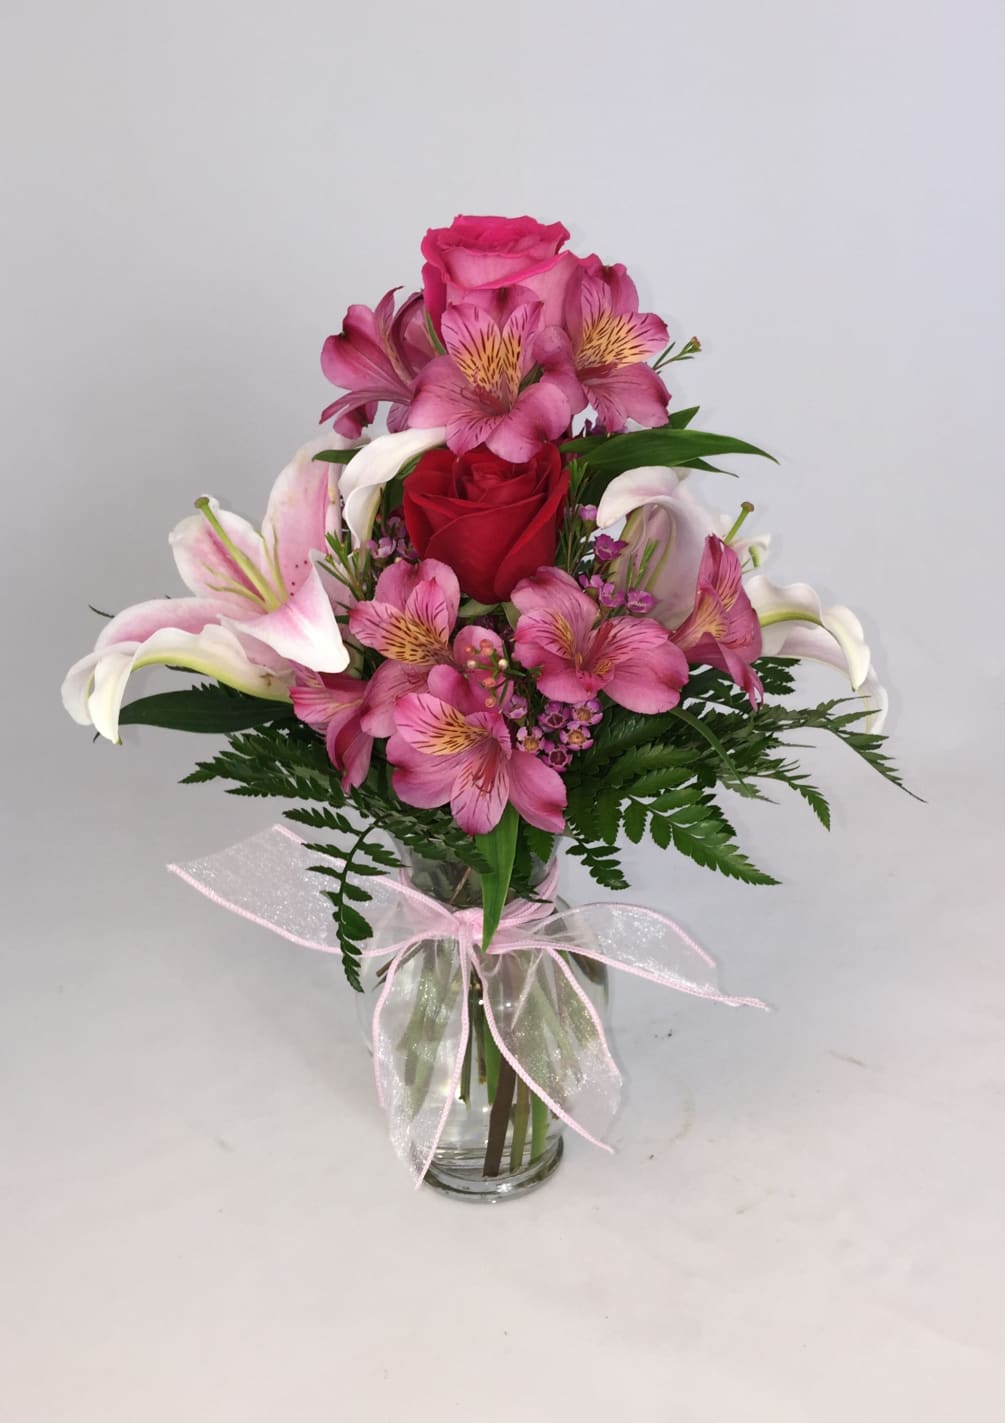 Pink Lillies, Pink Alstromaria, Pink Roses, and wax flower beautifully arranged in